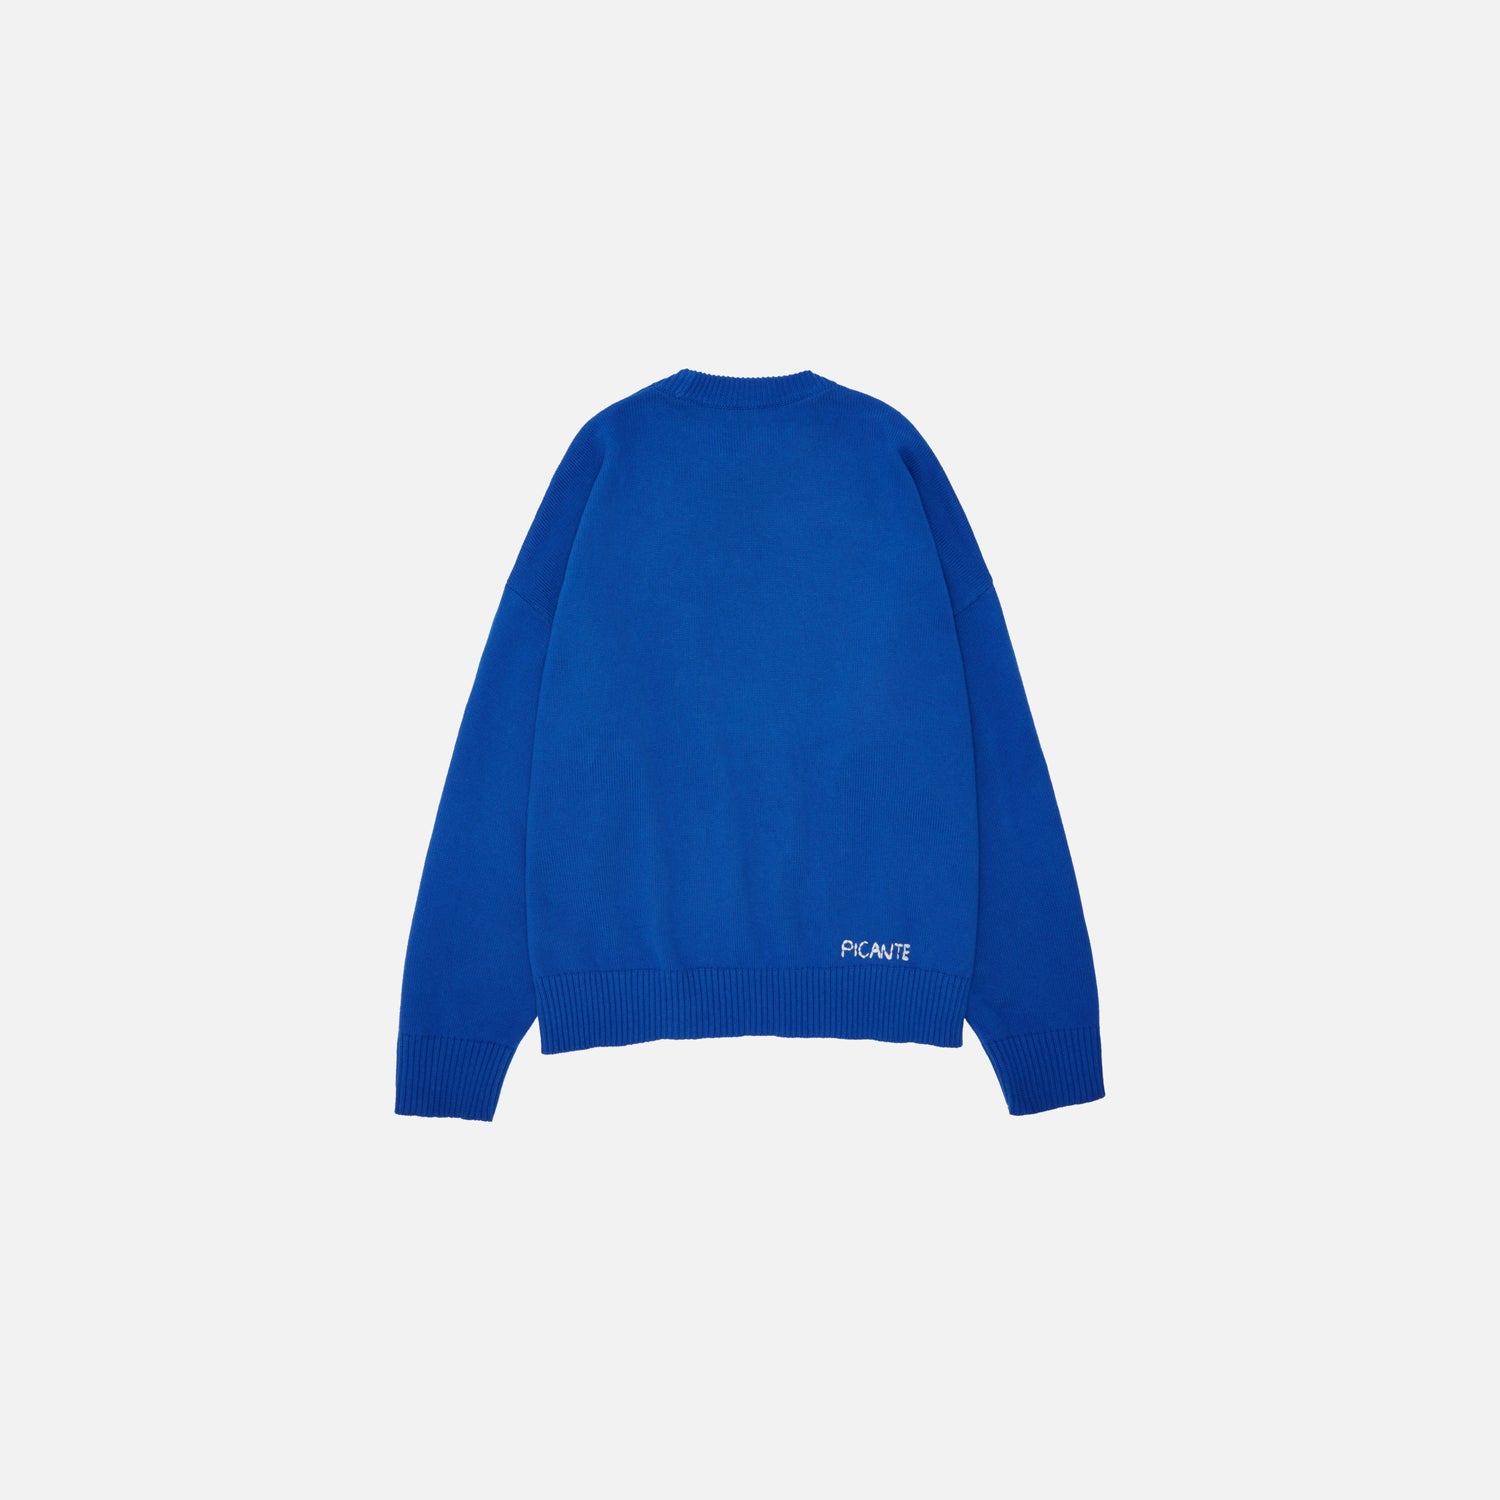 FORGE KNIT SWEATER ROYAL BLUE